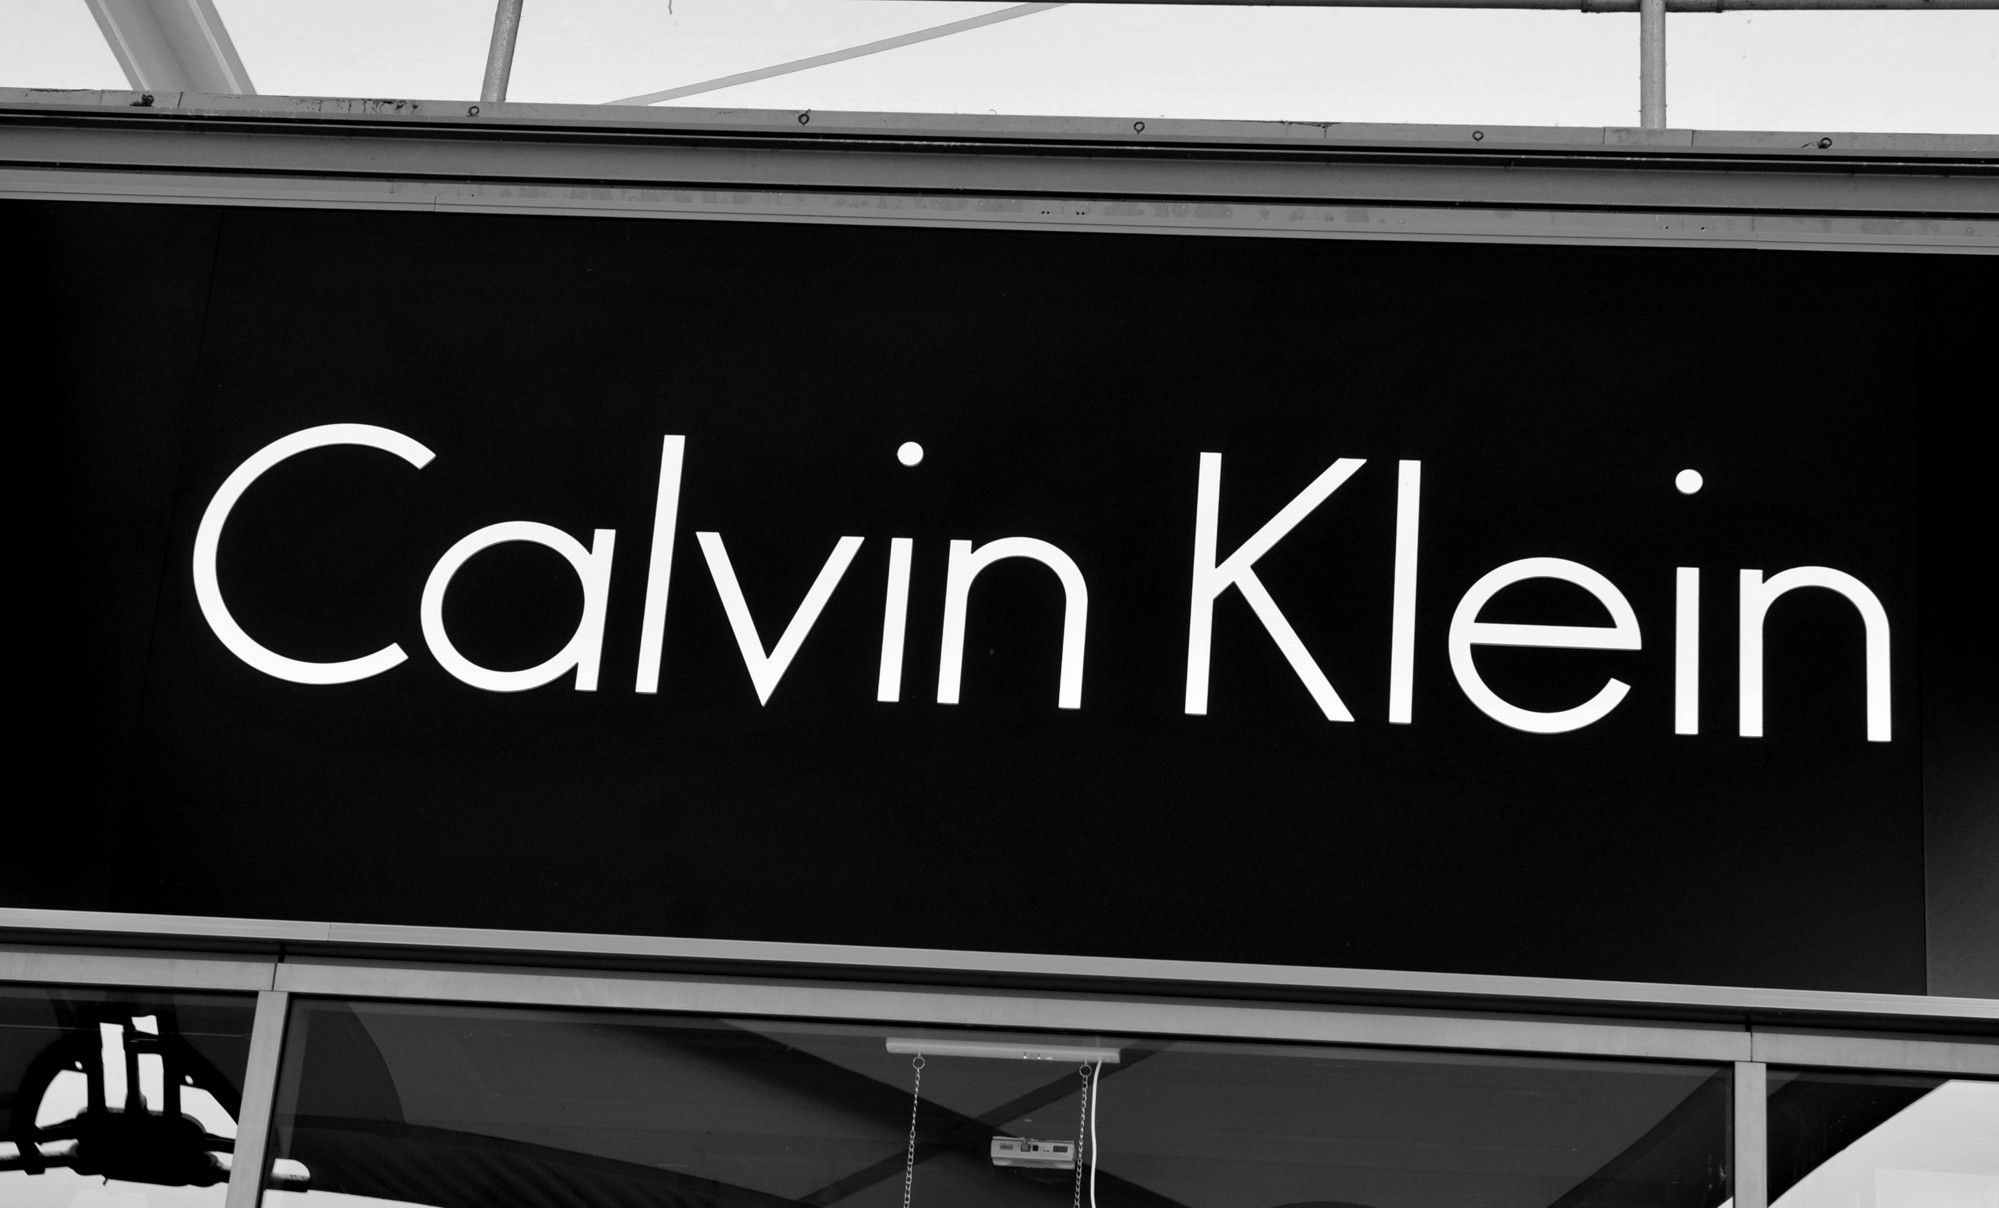 Tommy Hilfiger and Calvin Klein brand sales were allegedly misleading, a now dismissed class action says.